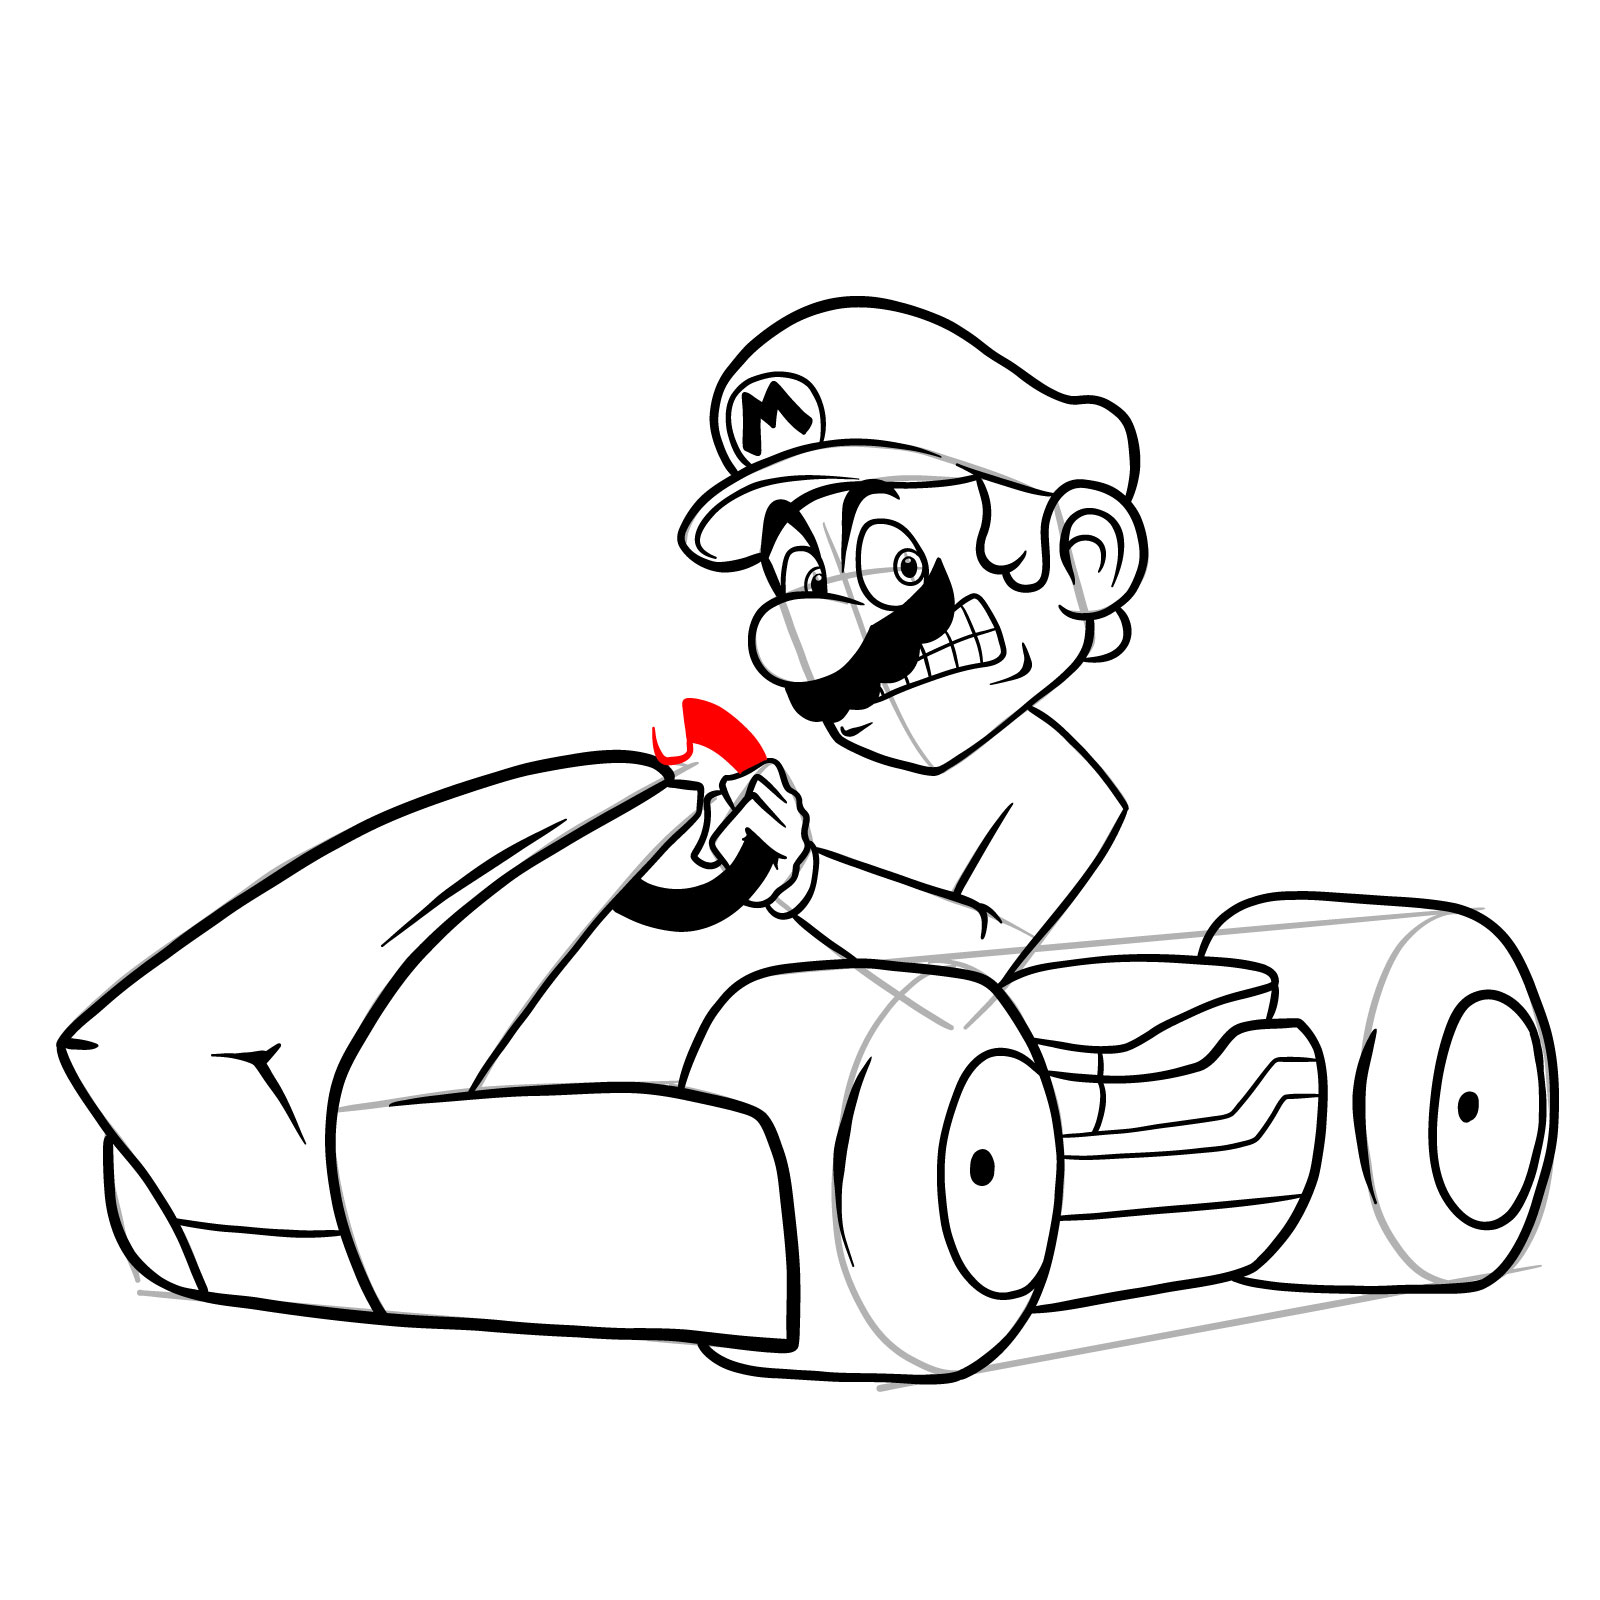 How to draw Race Traitors Mario - step 32